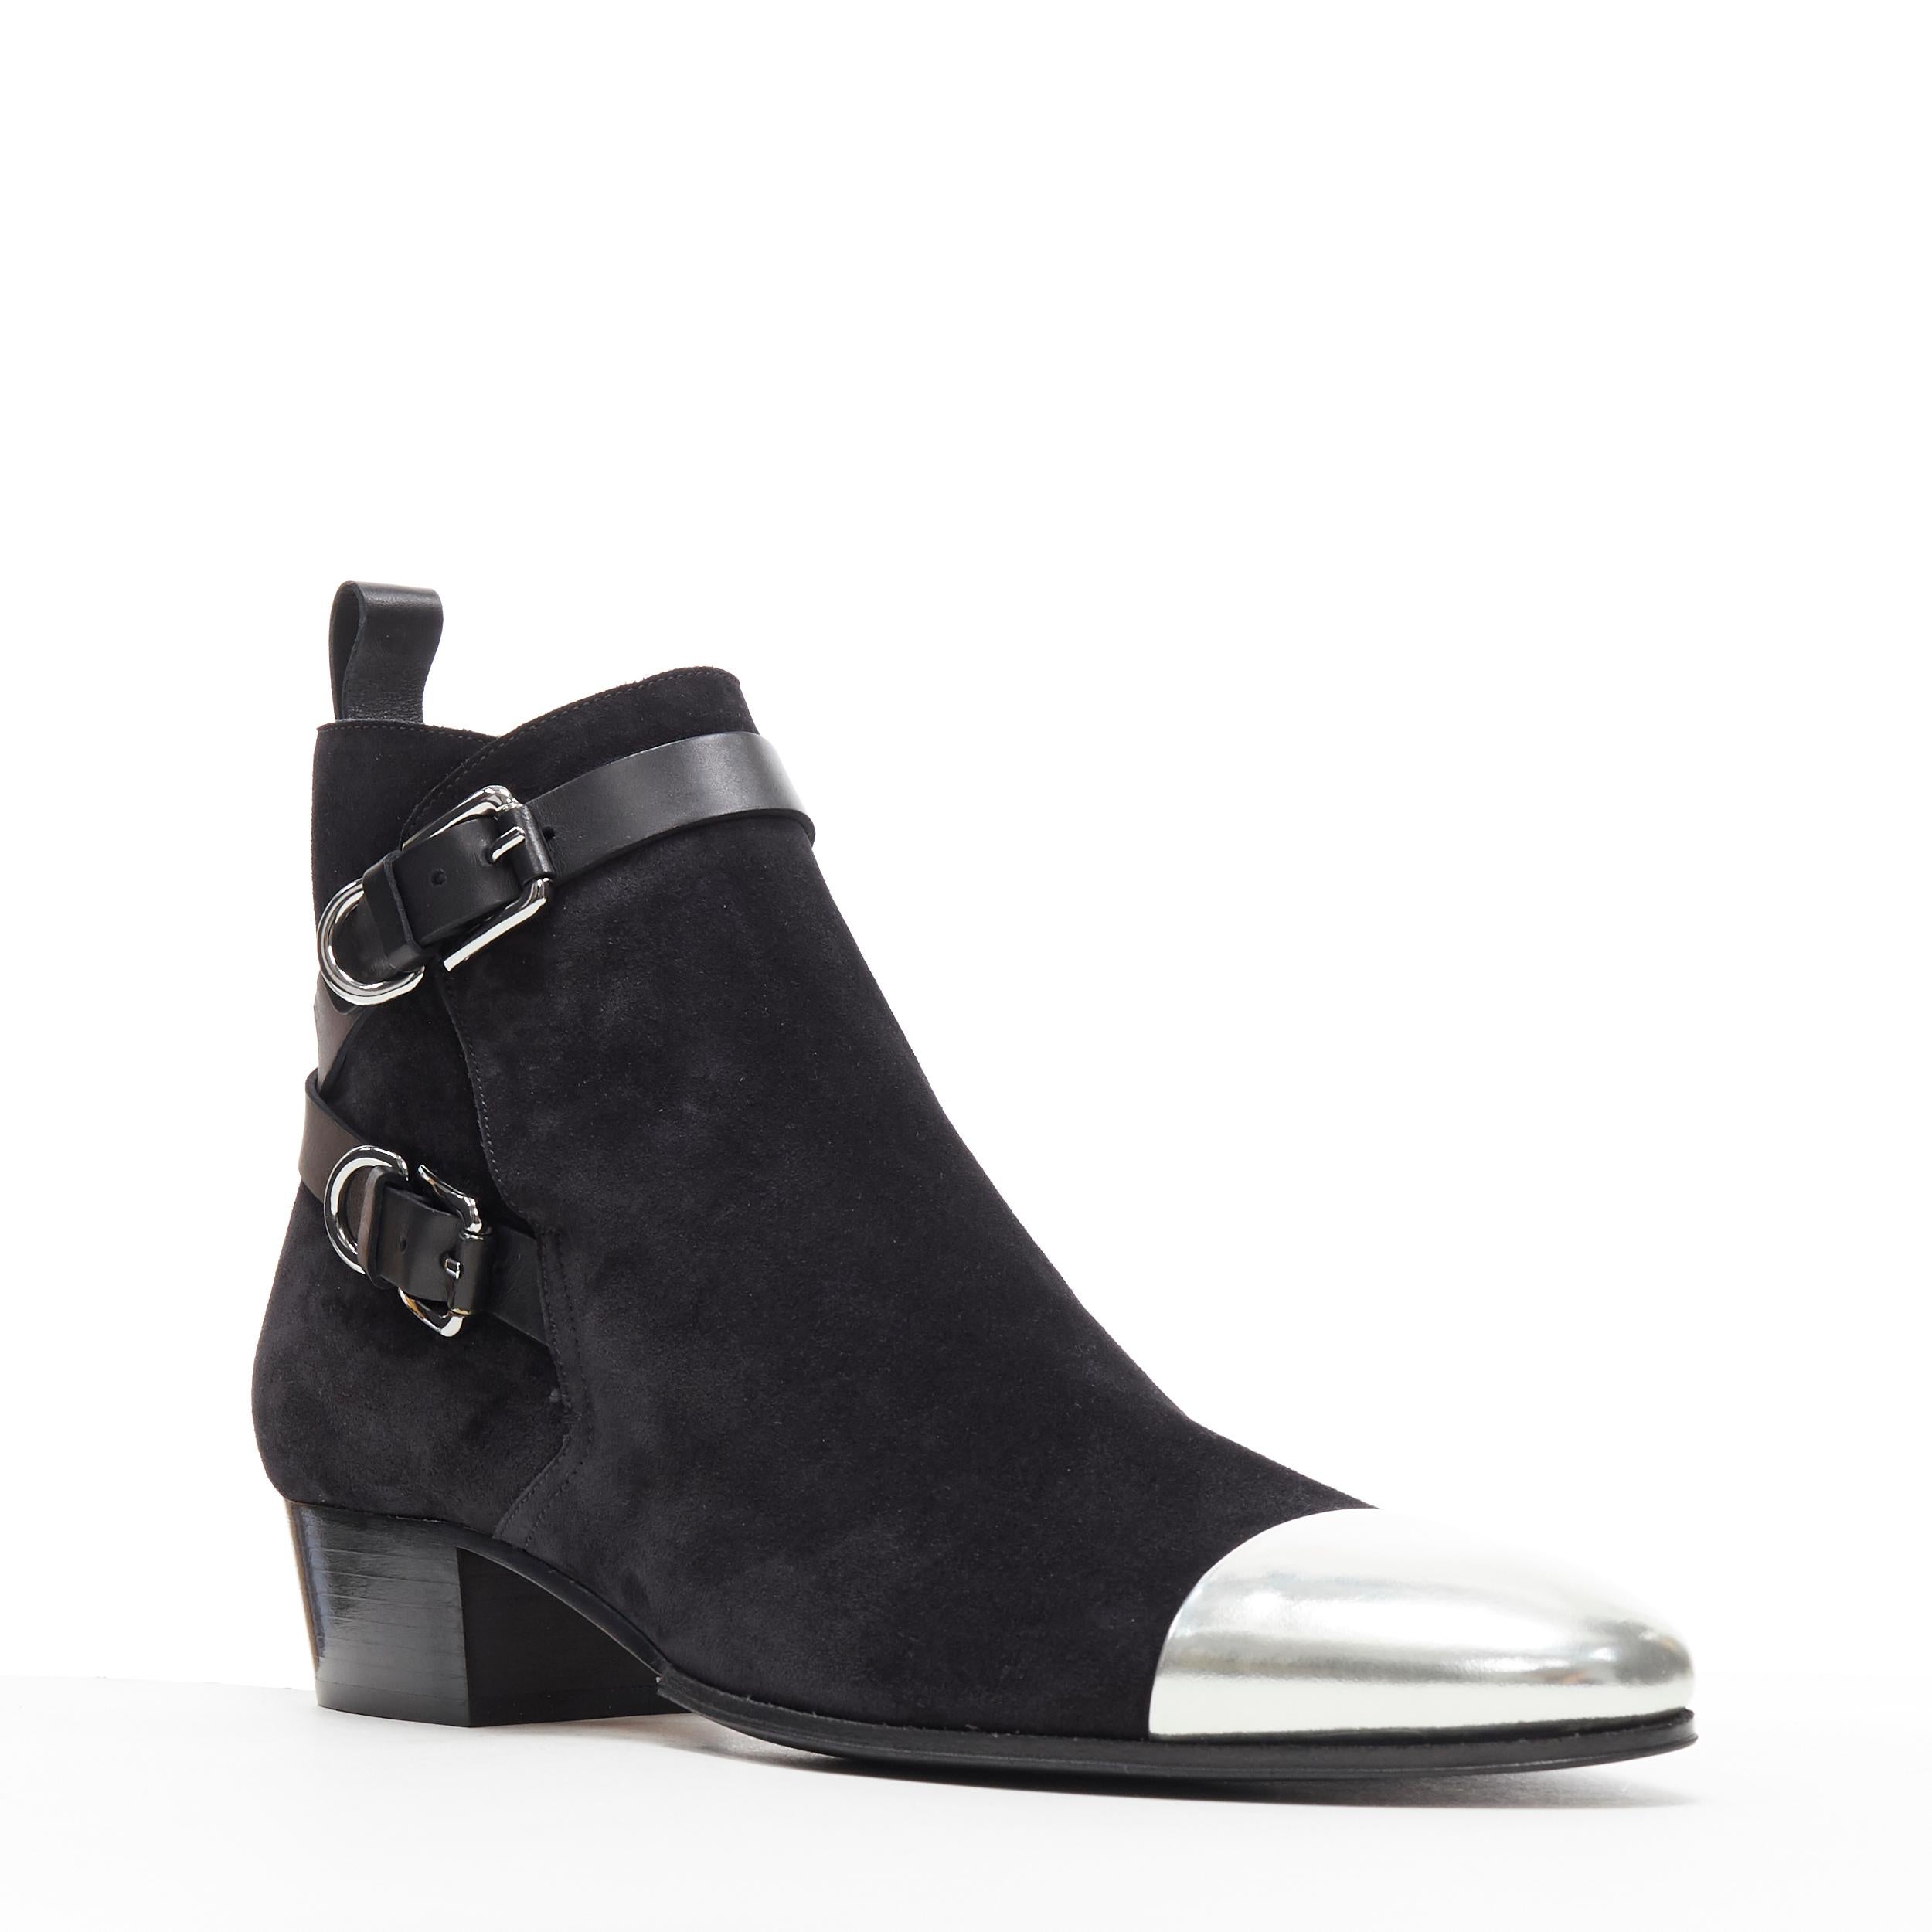 new BALMAIN classic black suede silver toe cap buckle anthos ankle boots EU43
Brand: Balmain
Designer: Olivier Rousteing
Model Name / Style: Suede ankle boot
Material: Suede
Color: Black
Pattern: Solid
Closure: Buckle
Extra Detail: Black genuine